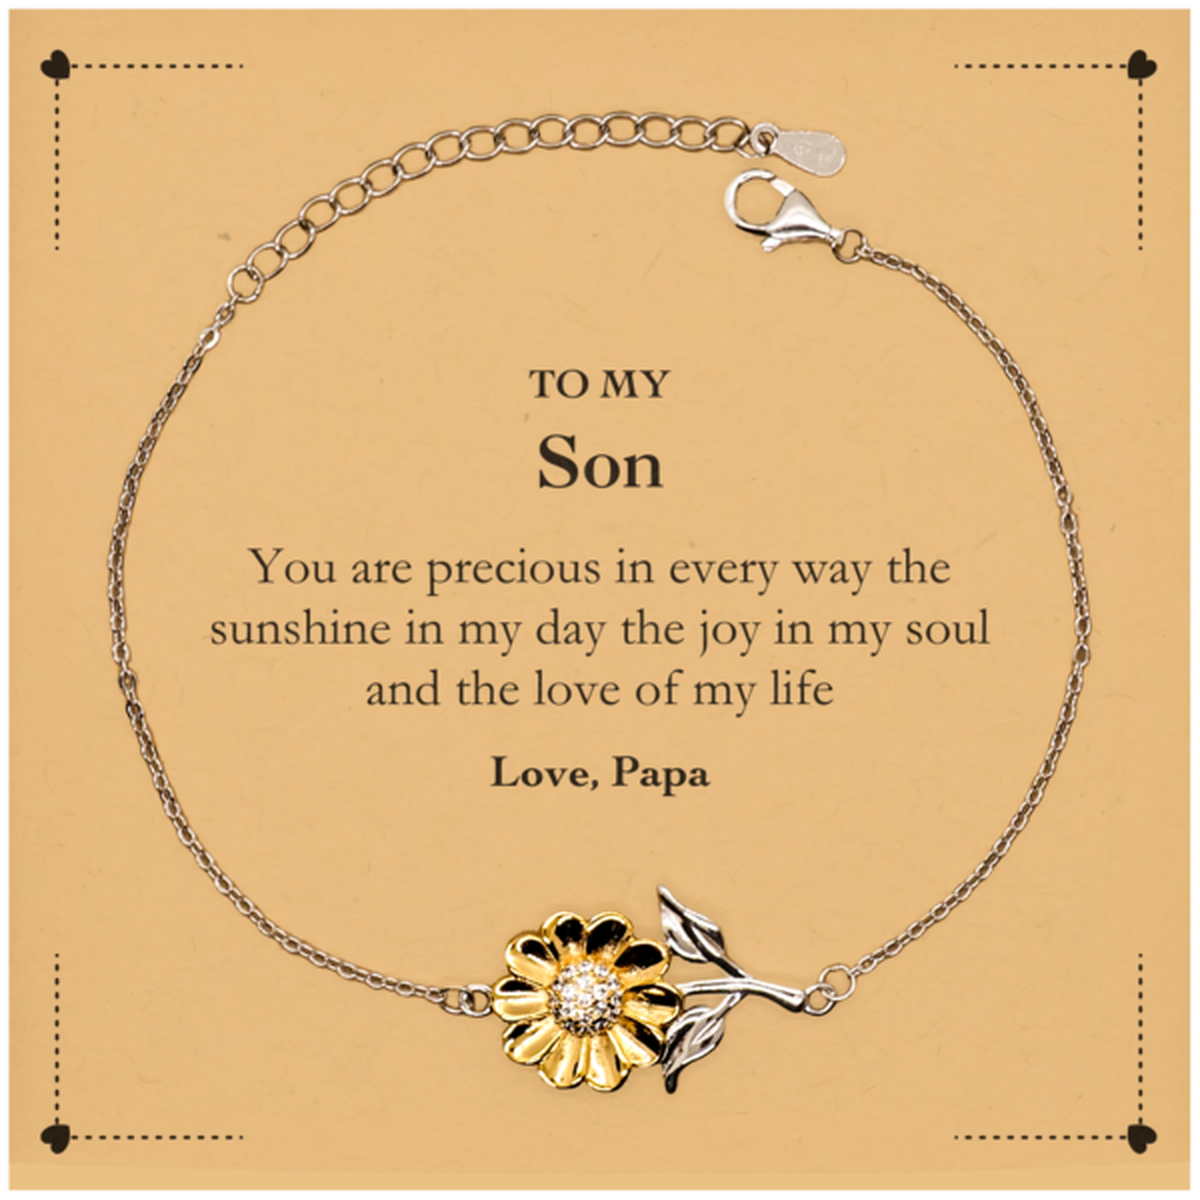 Graduation Gifts for Son Sunflower Bracelet Present from Papa, Christmas Son Birthday Gifts Son You are precious in every way the sunshine in my day. Love, Papa